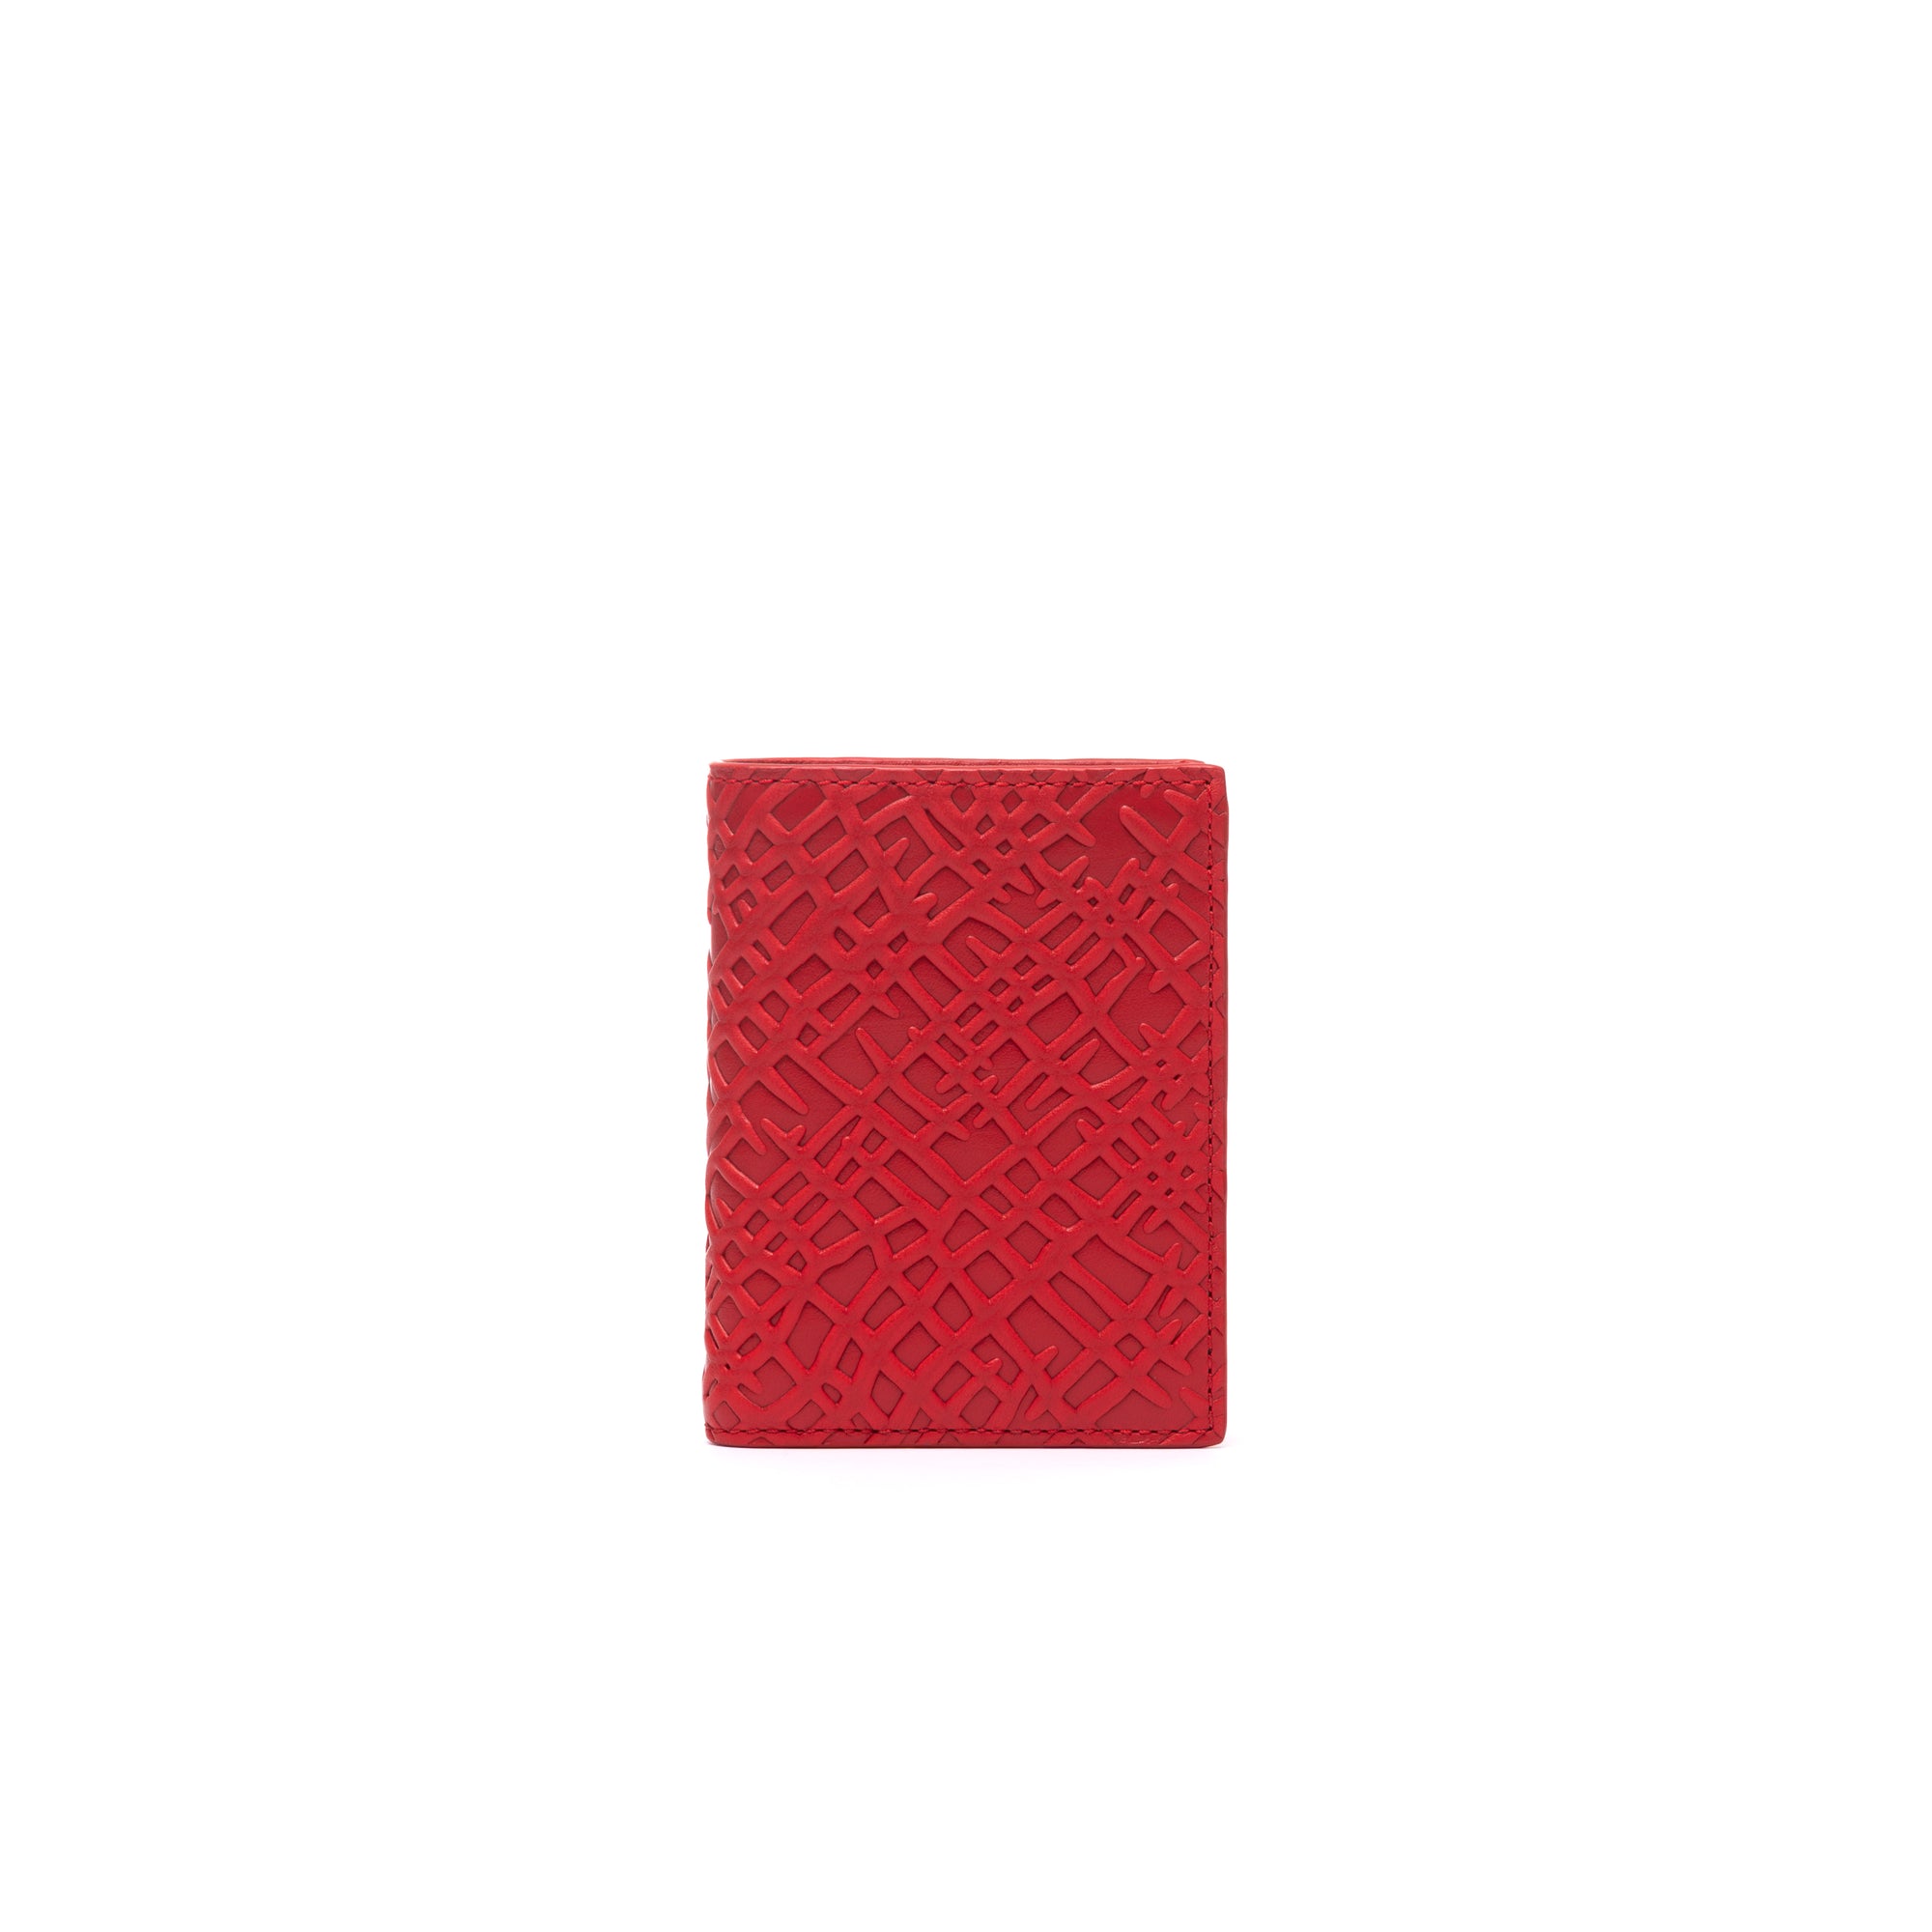 CDG WALLET - Embossed Roots (SA0641ER Red) view 1